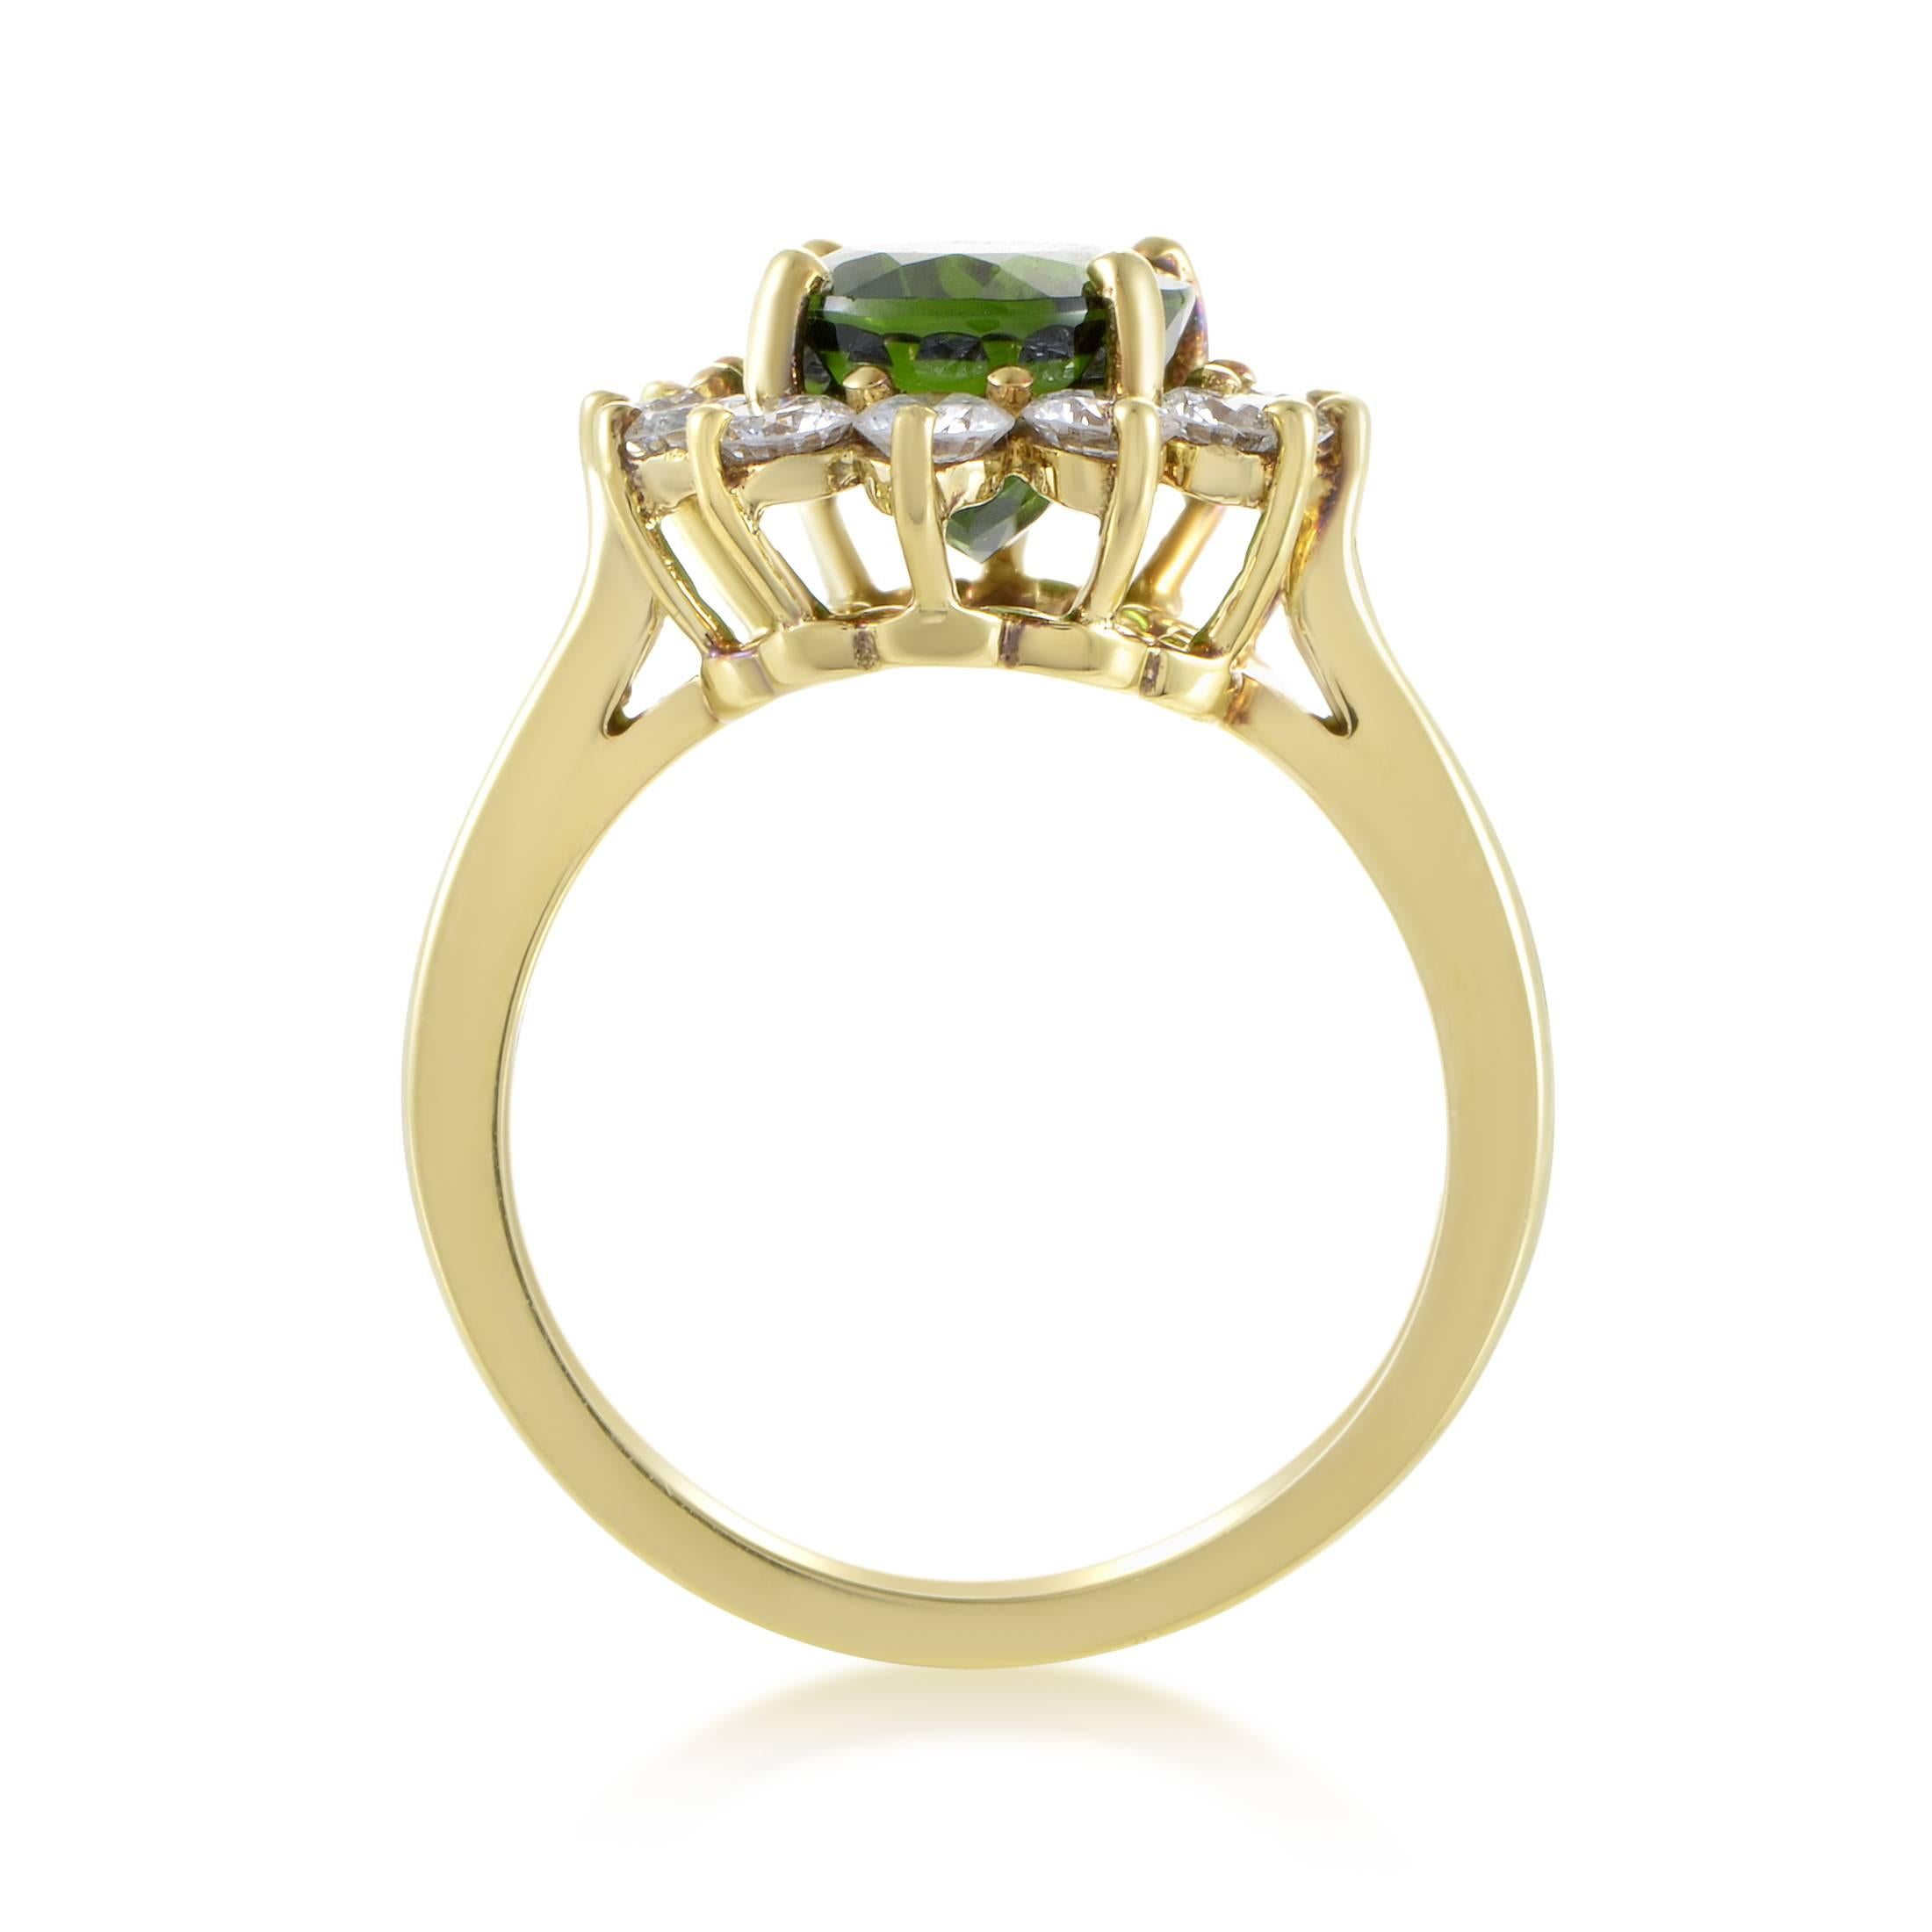 Providing a wonderful backdrop for the majestic beauty and exquisite cut of the remarkable green tourmaline weighing 3.00 carats, the neat arrangement of glittering diamonds amounting to 0.75ct adds a stunning final touch to this 18K yellow gold